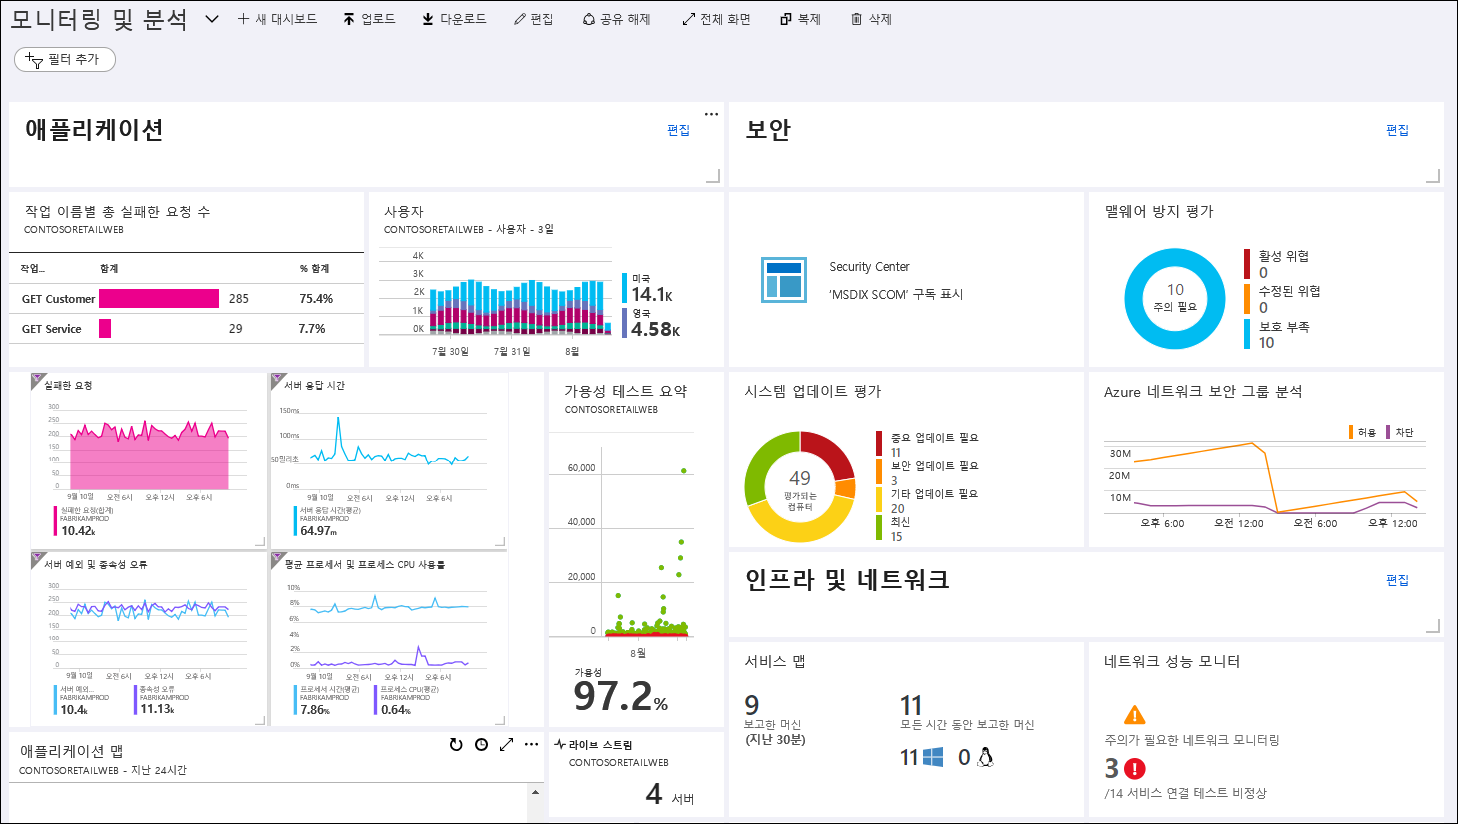 Screenshot of an Azure dashboard that displays metrics in graph format for application performance metrics at left and security incidents at right.